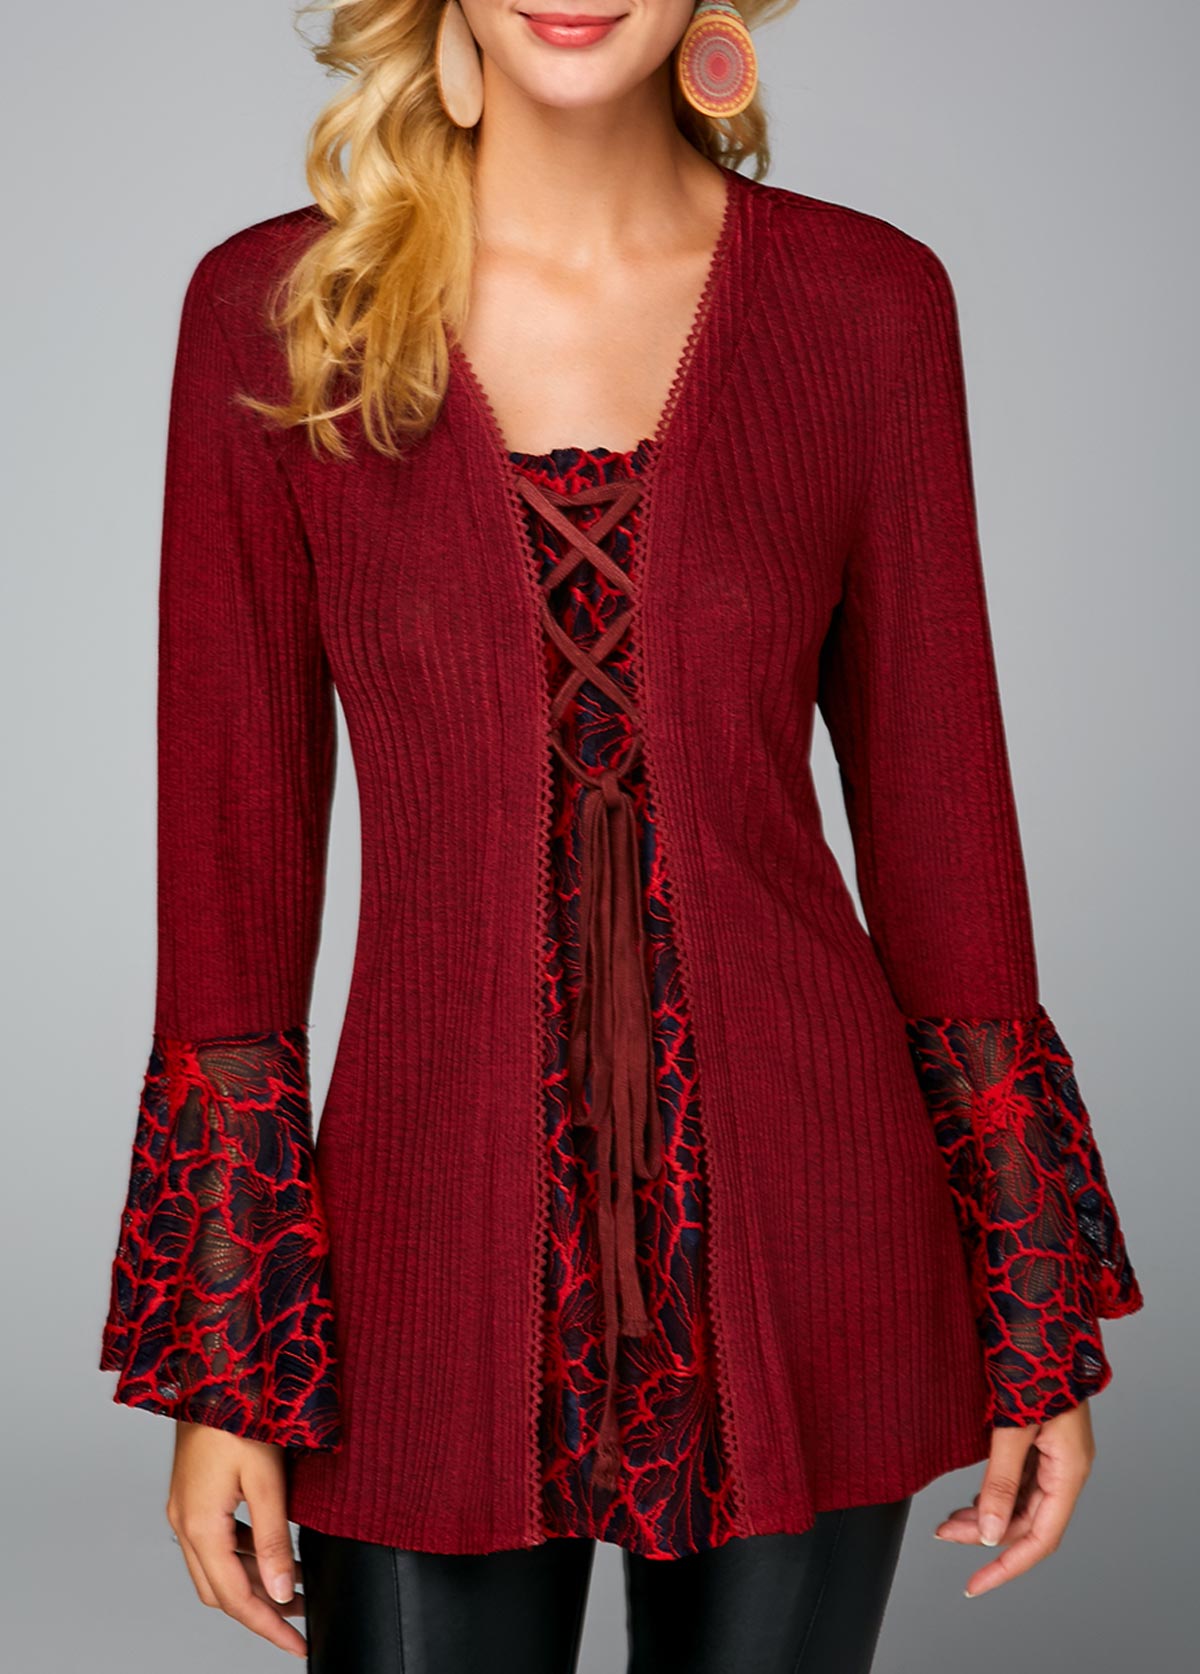 Picot Trim Lace Up Wine Red Sweater